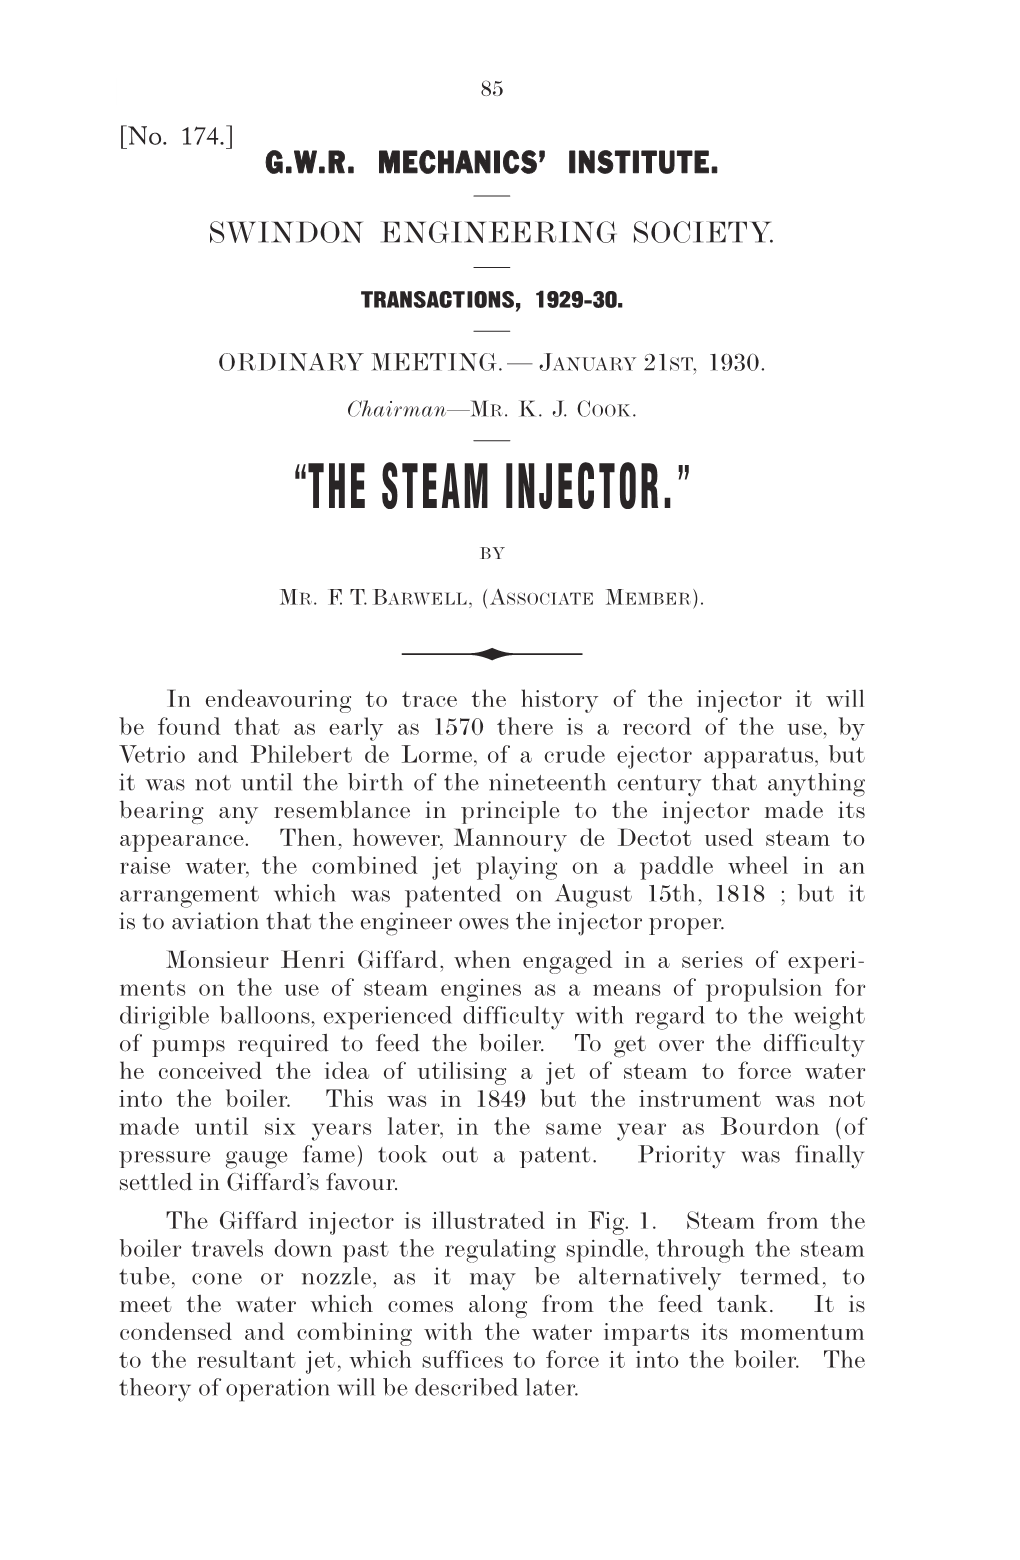 “The Steam Injector.”